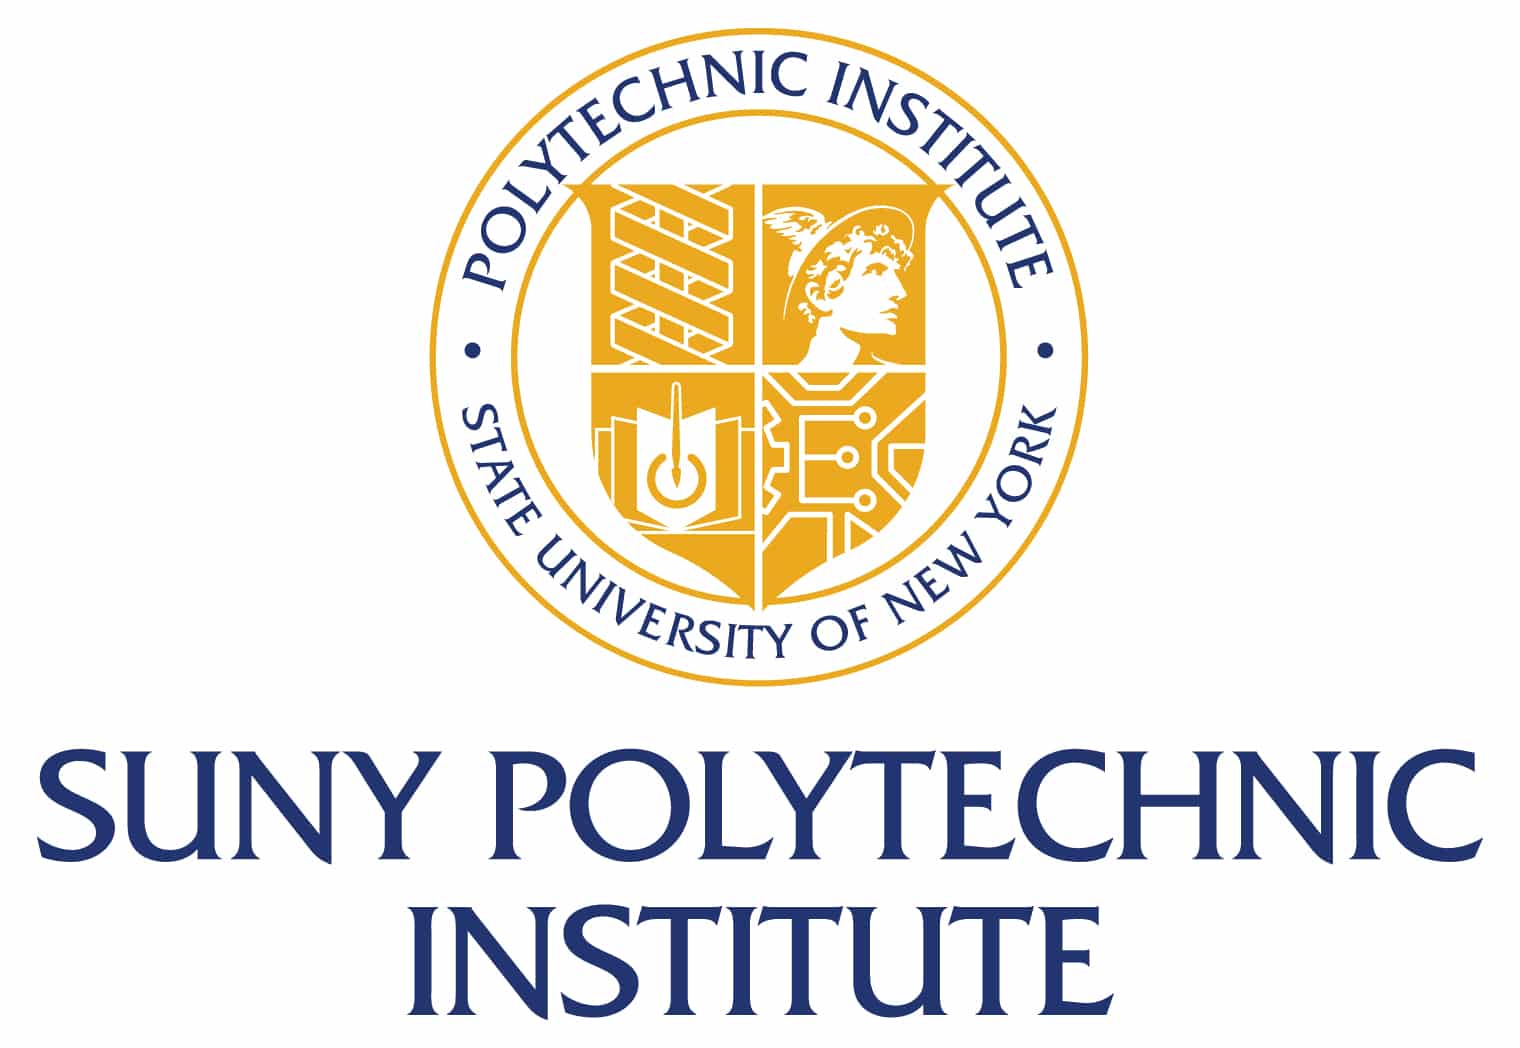 Graduate Assistantships at SUNY Polytechnic Institute for International Students in the United States